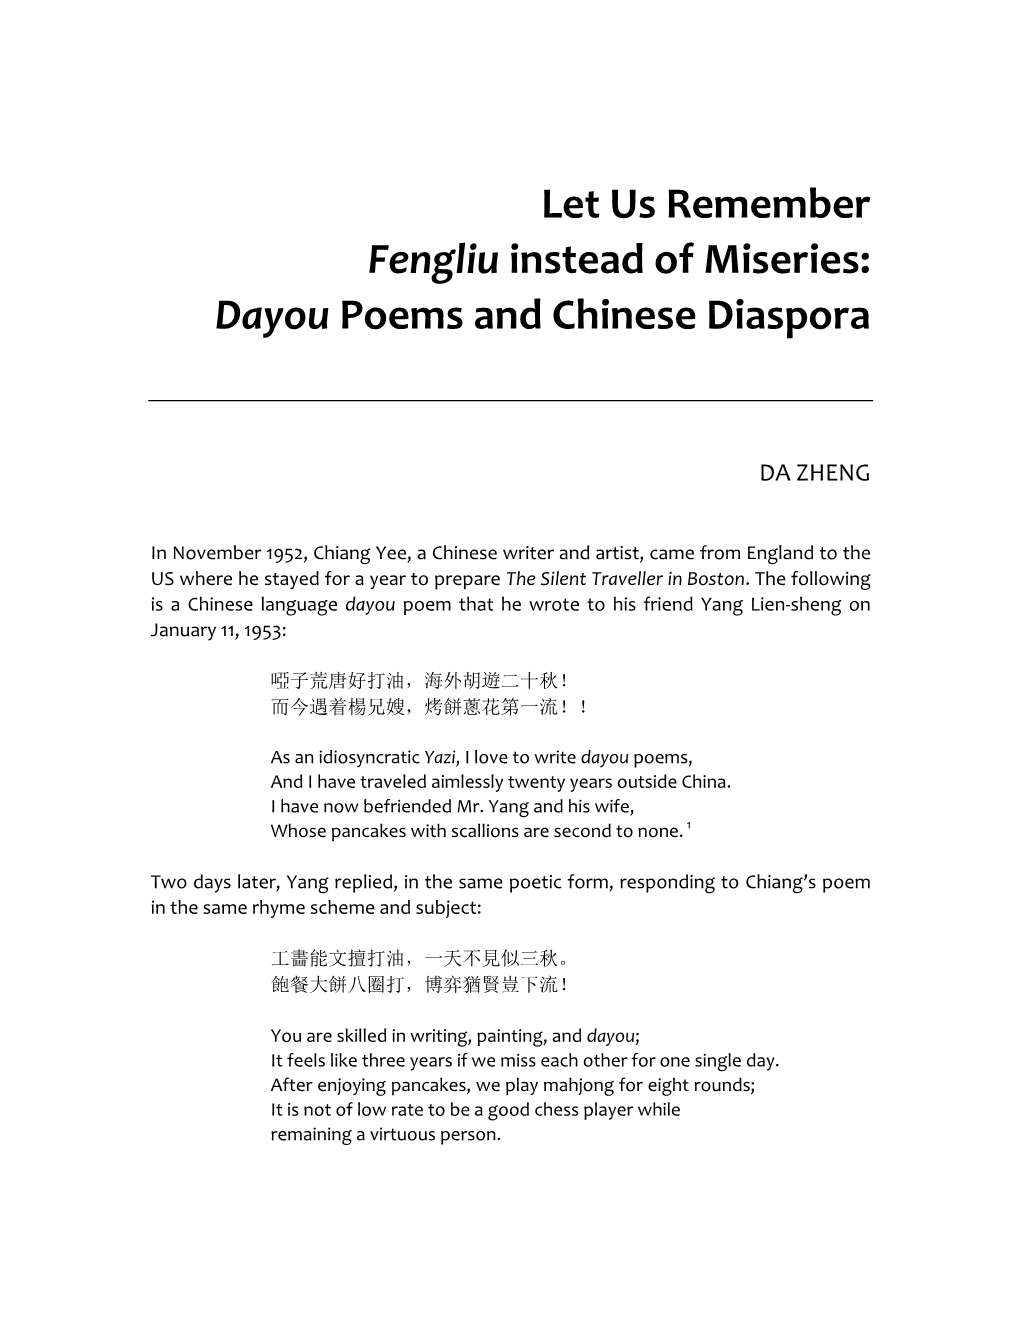 Remember Fengliu Instead of Miseries: Dayou Poems and Chinese Diaspora